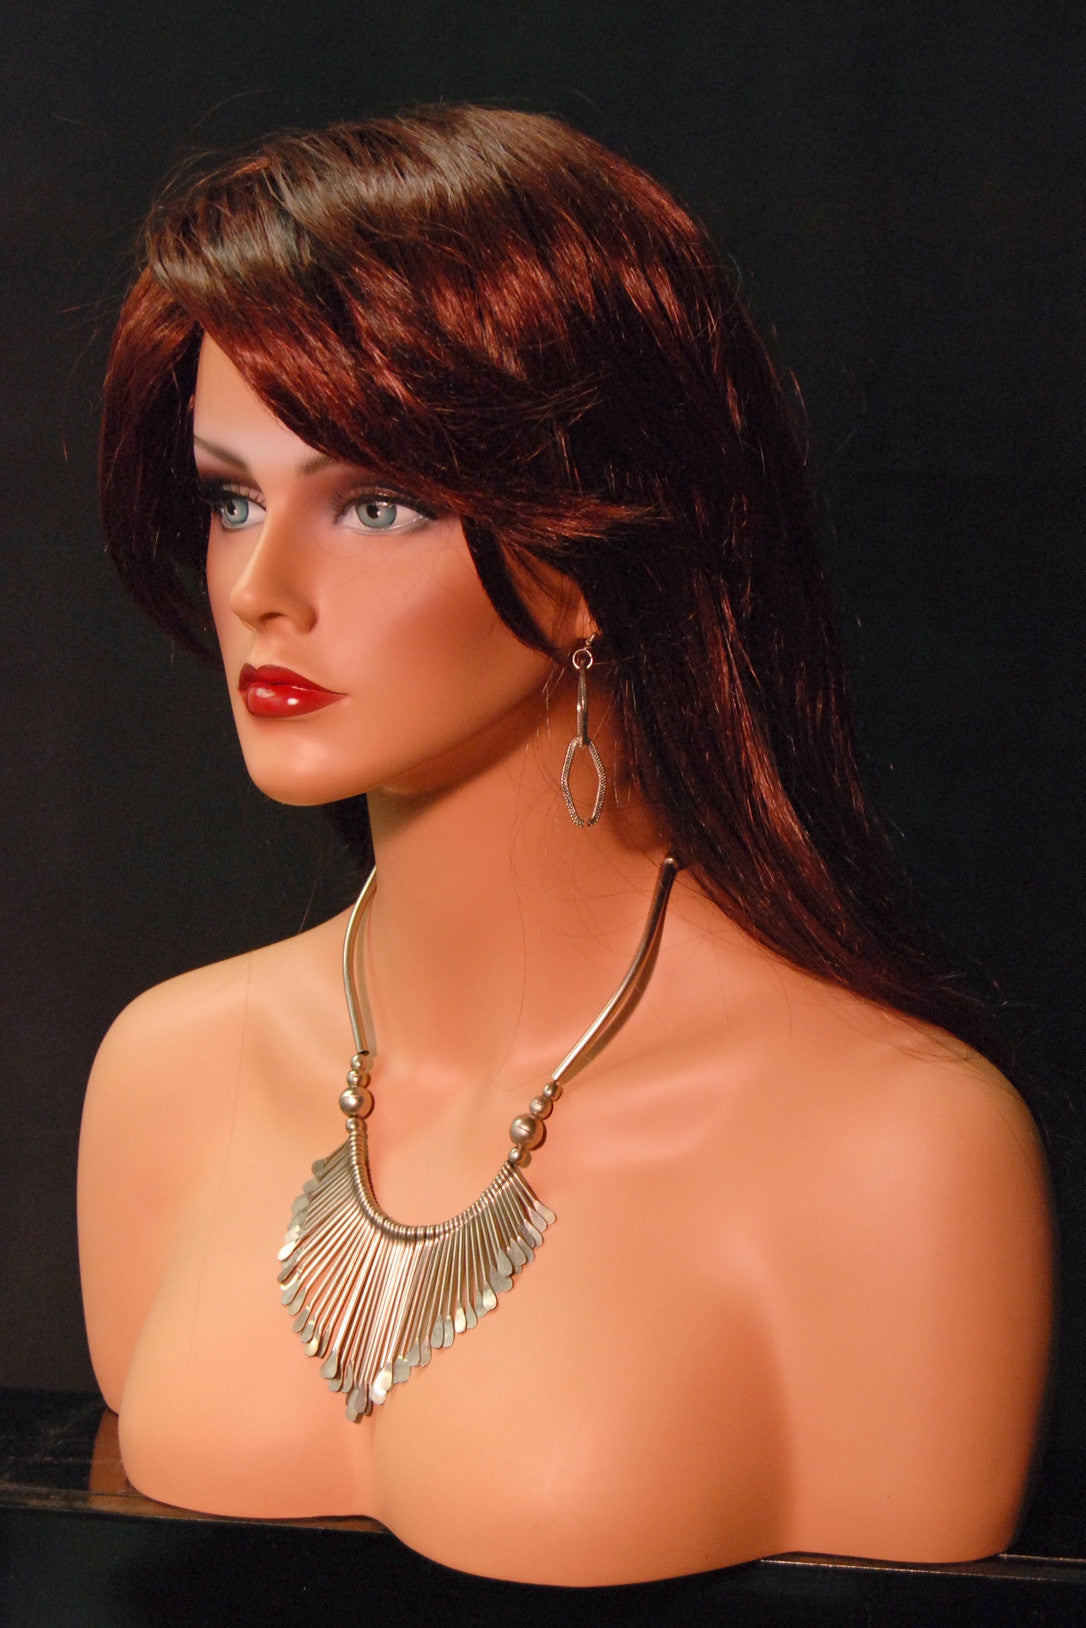 Realistic Female Mannequin Head Form with Pierced Ears